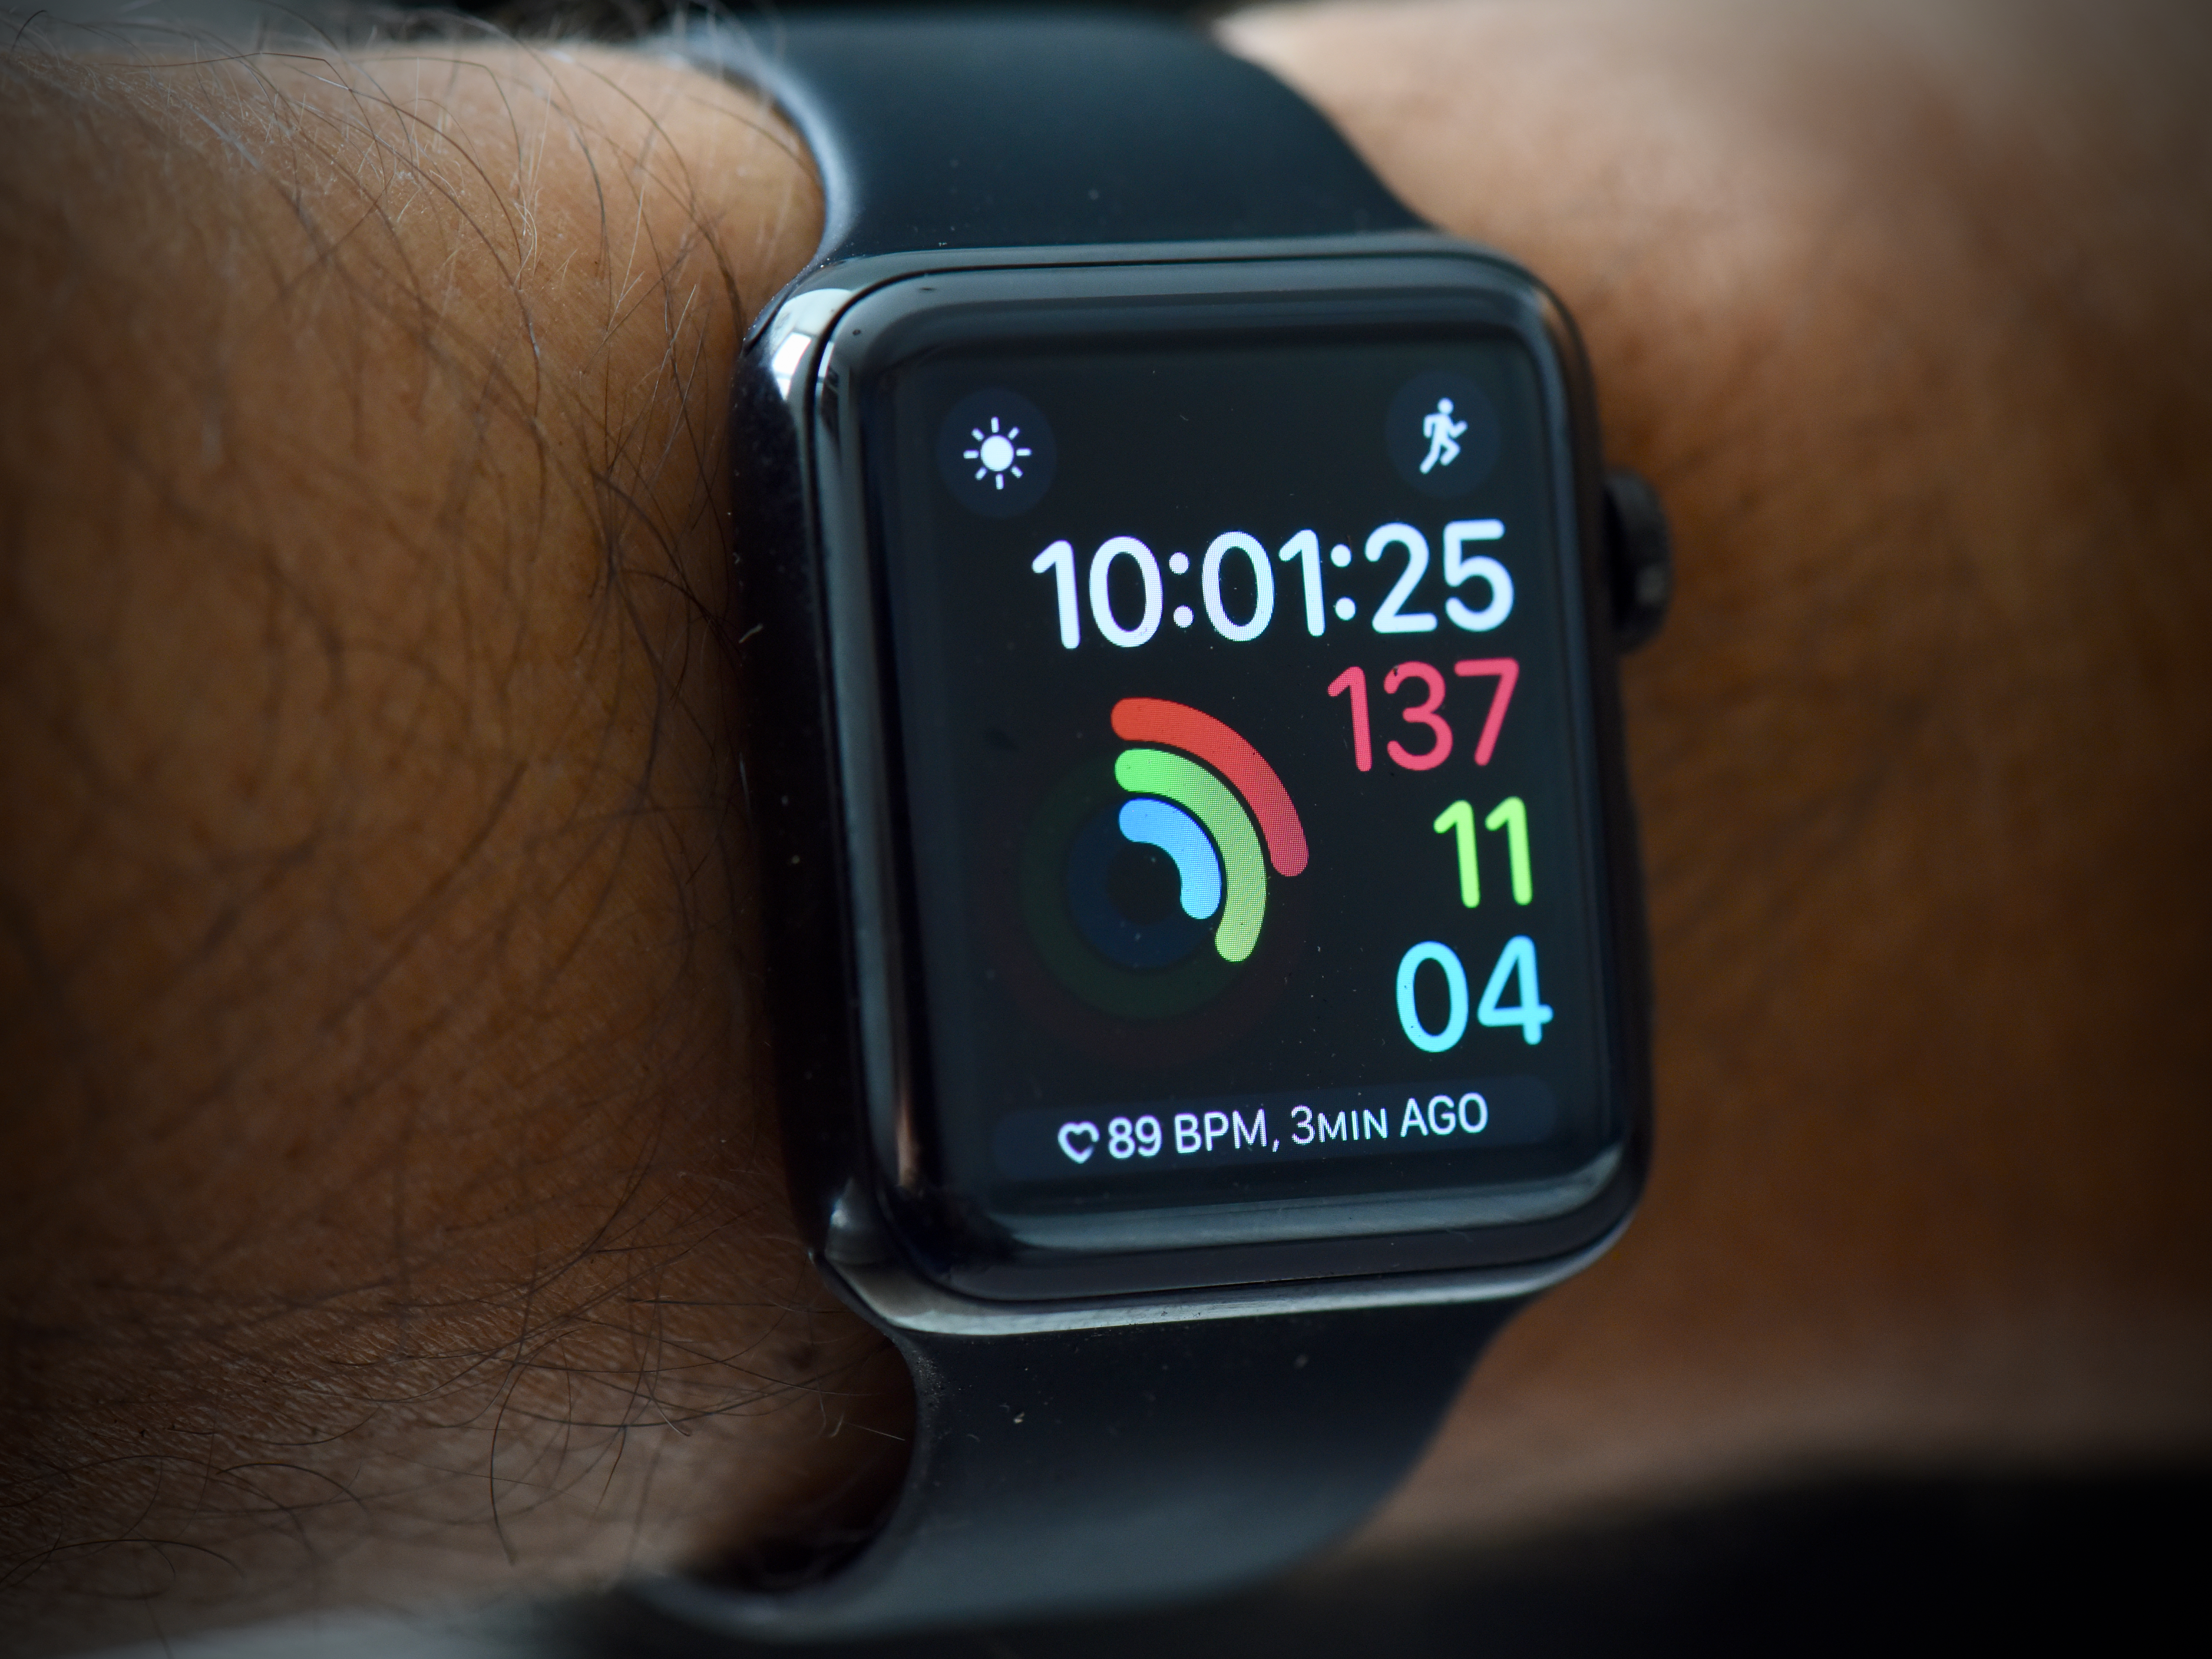 5 Reasons To Buy The Apple Watch 3 In 2021 3 Reasons Not To